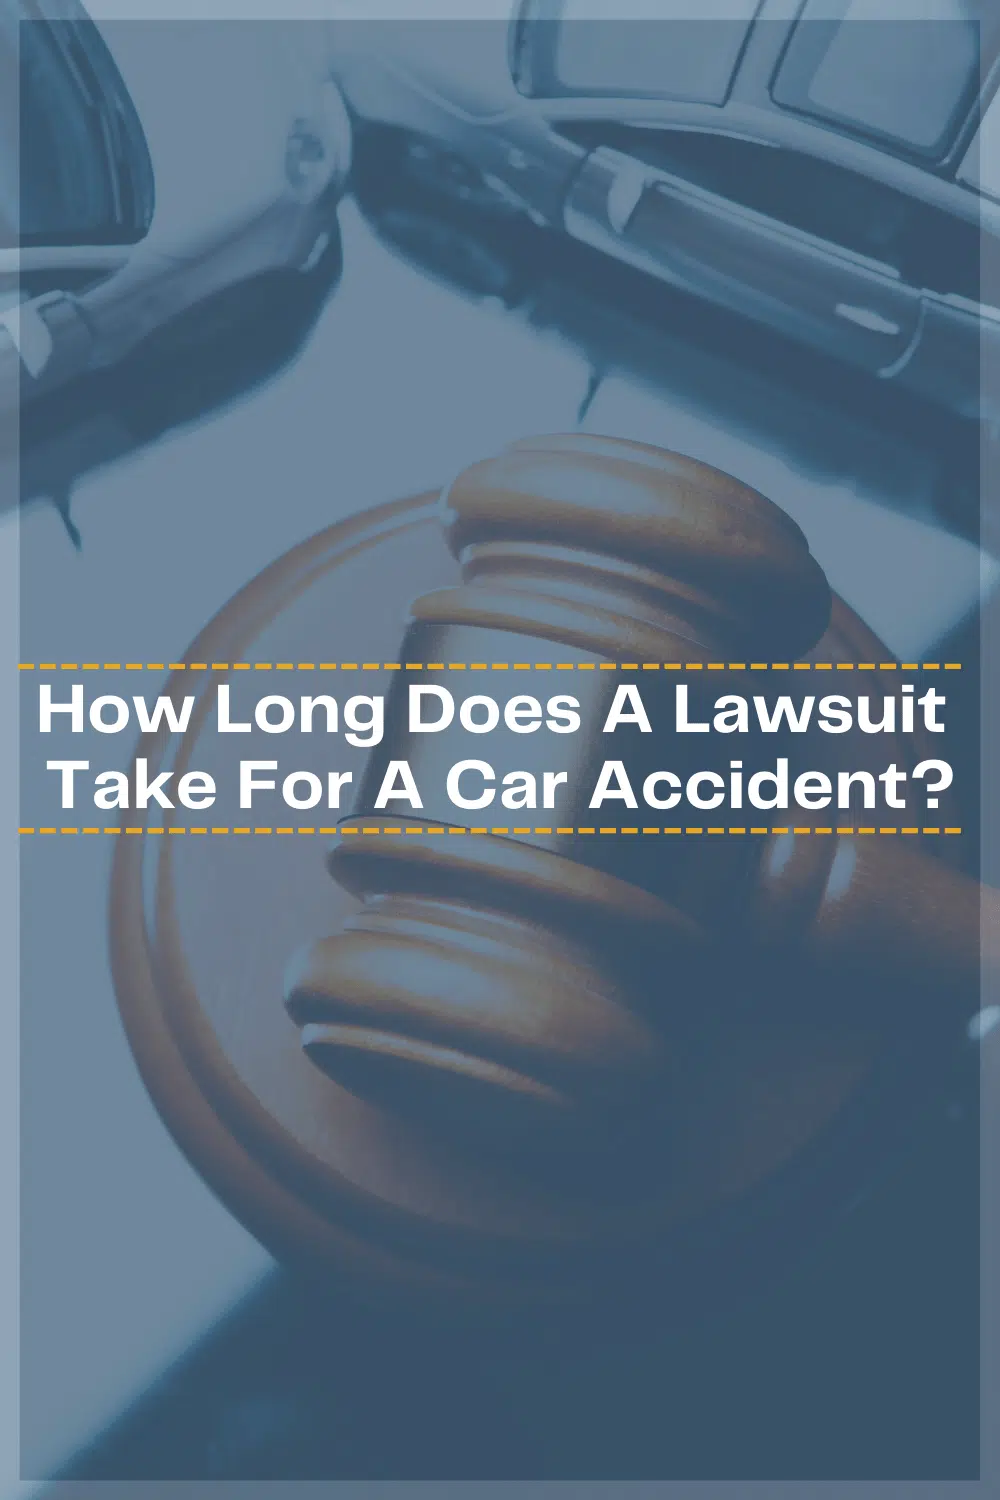 How Long Does A Lawsuit Take For A Car Accident?